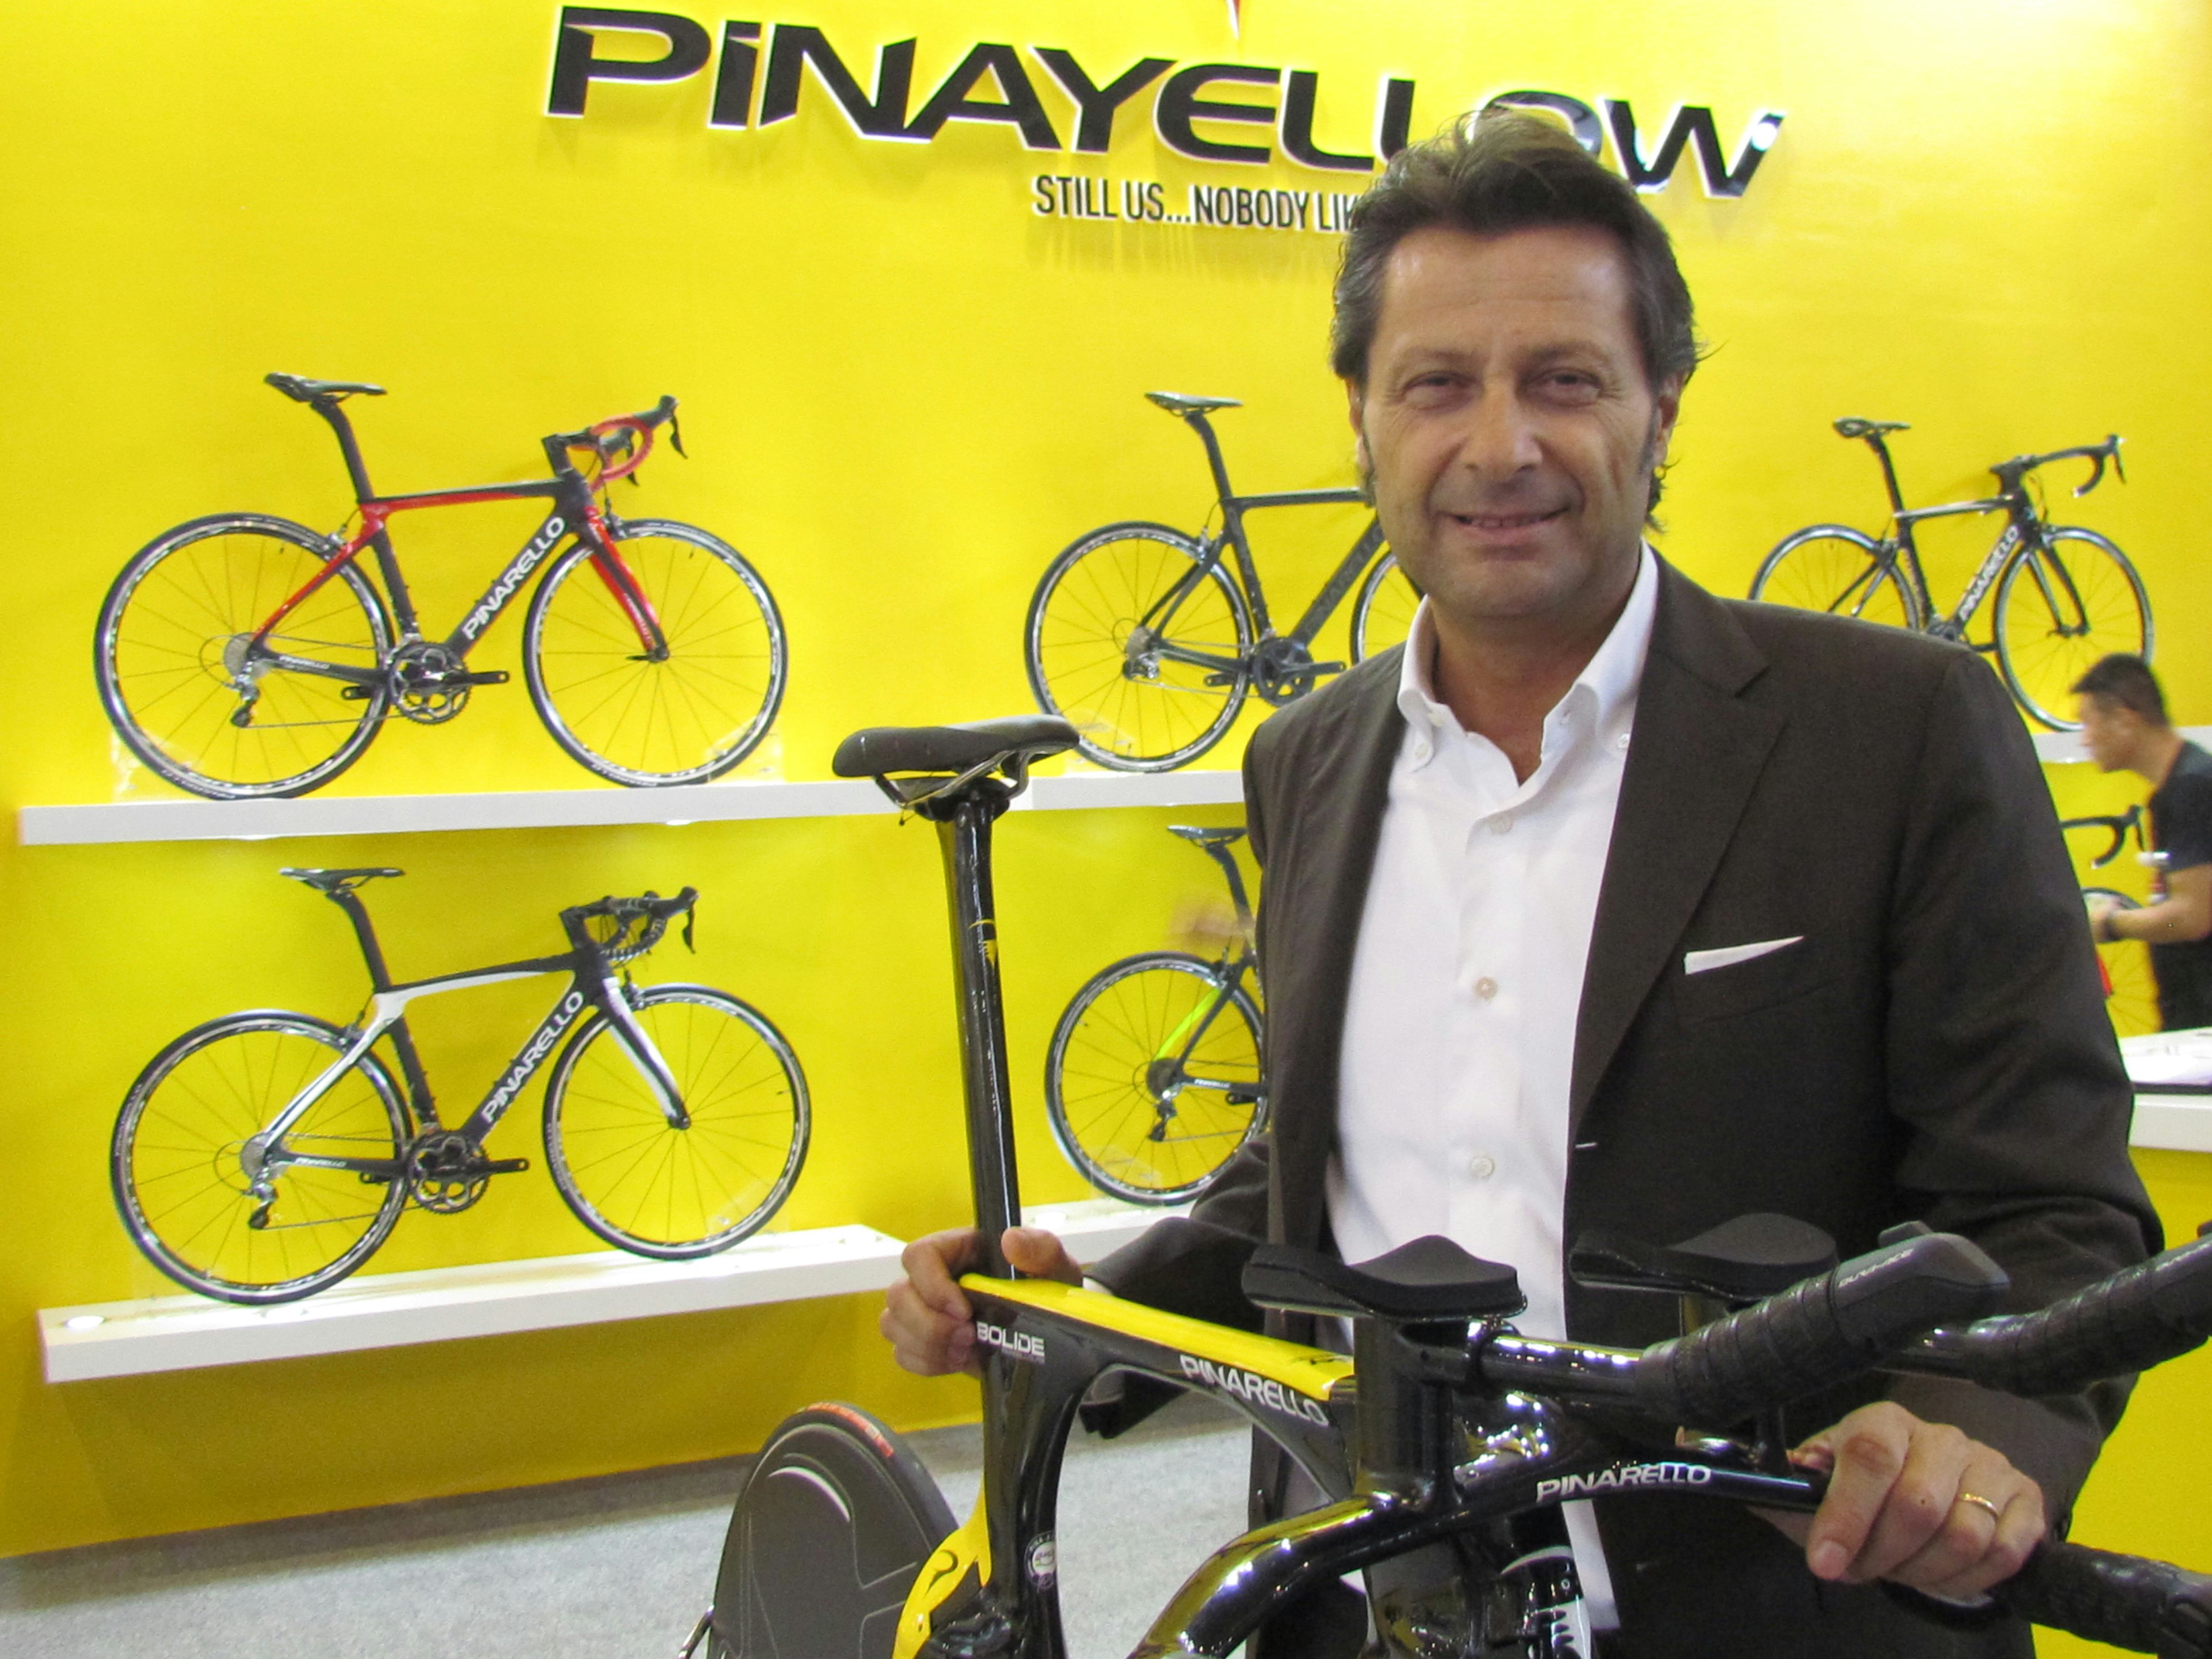 Fausto Pinarello at his Asia Bike’s booth, ‘High-end road bikes are really a new thing for the Chinese.’ Photo Bike Europe